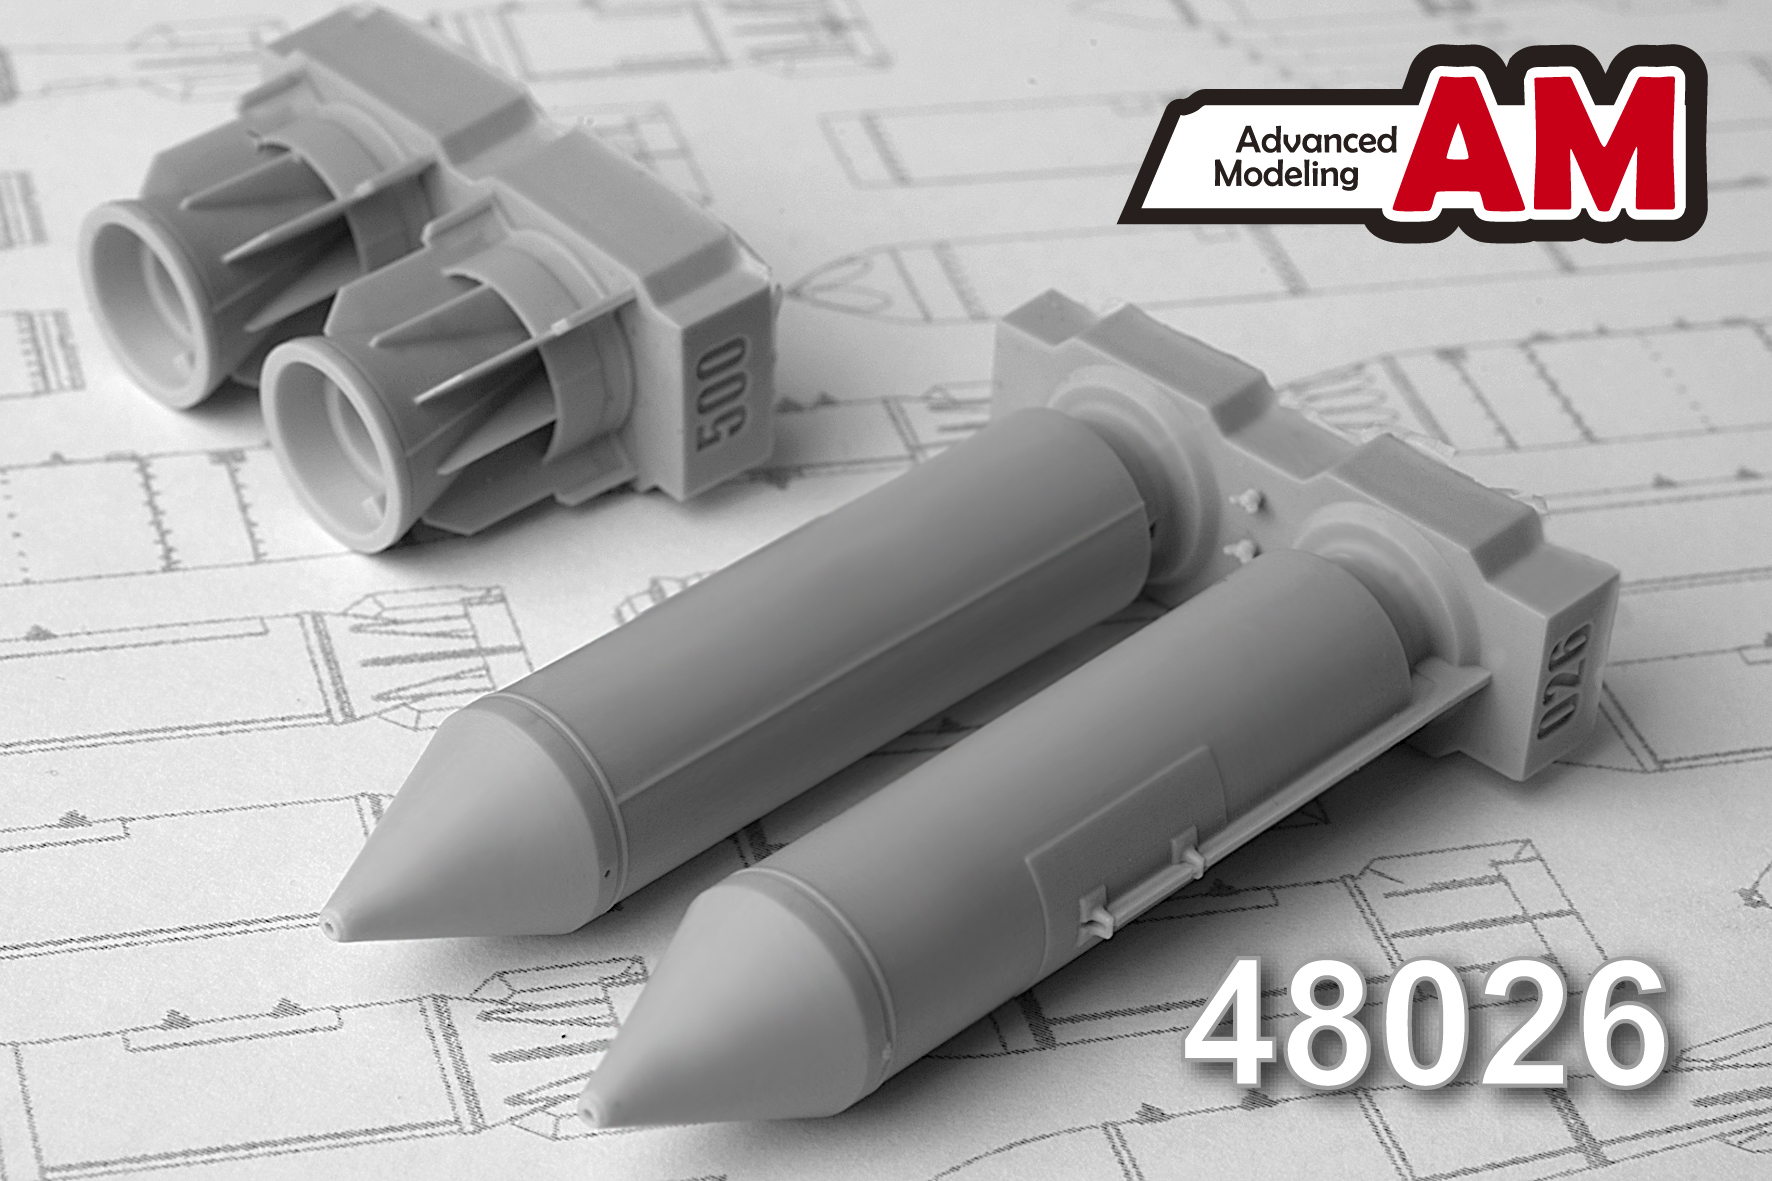 Additions (3D resin printing) 1/48 RBK-500 BETAB, 500 kg Cluster Bomb loaded with Concrete-Piercing Submunitions (Advanced Modeling) 